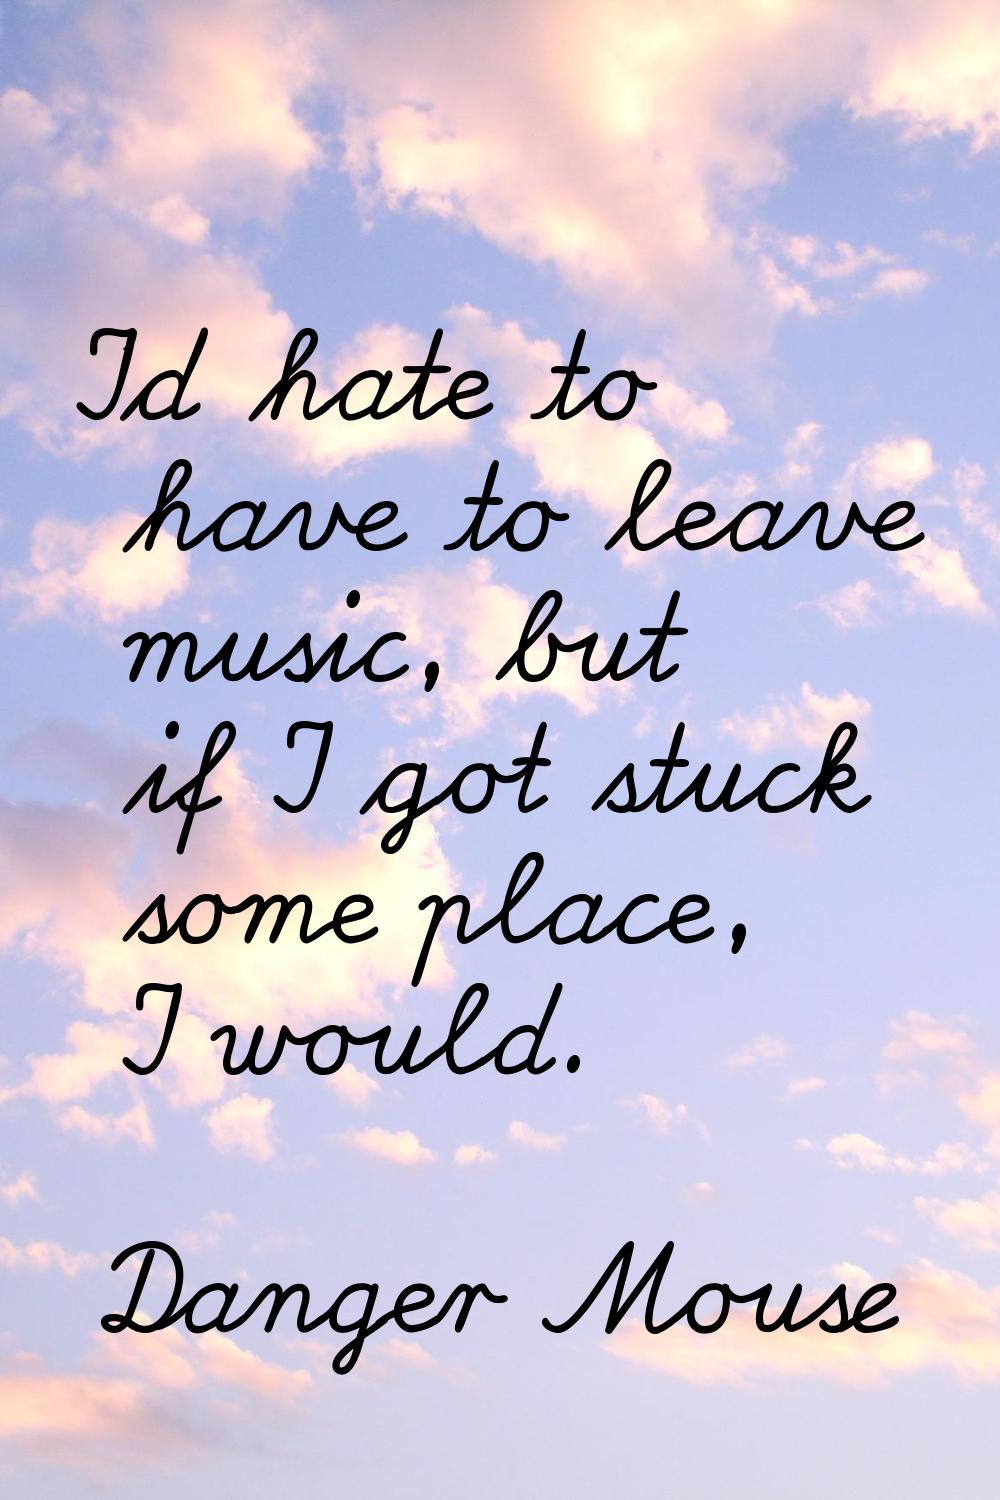 I'd hate to have to leave music, but if I got stuck some place, I would.